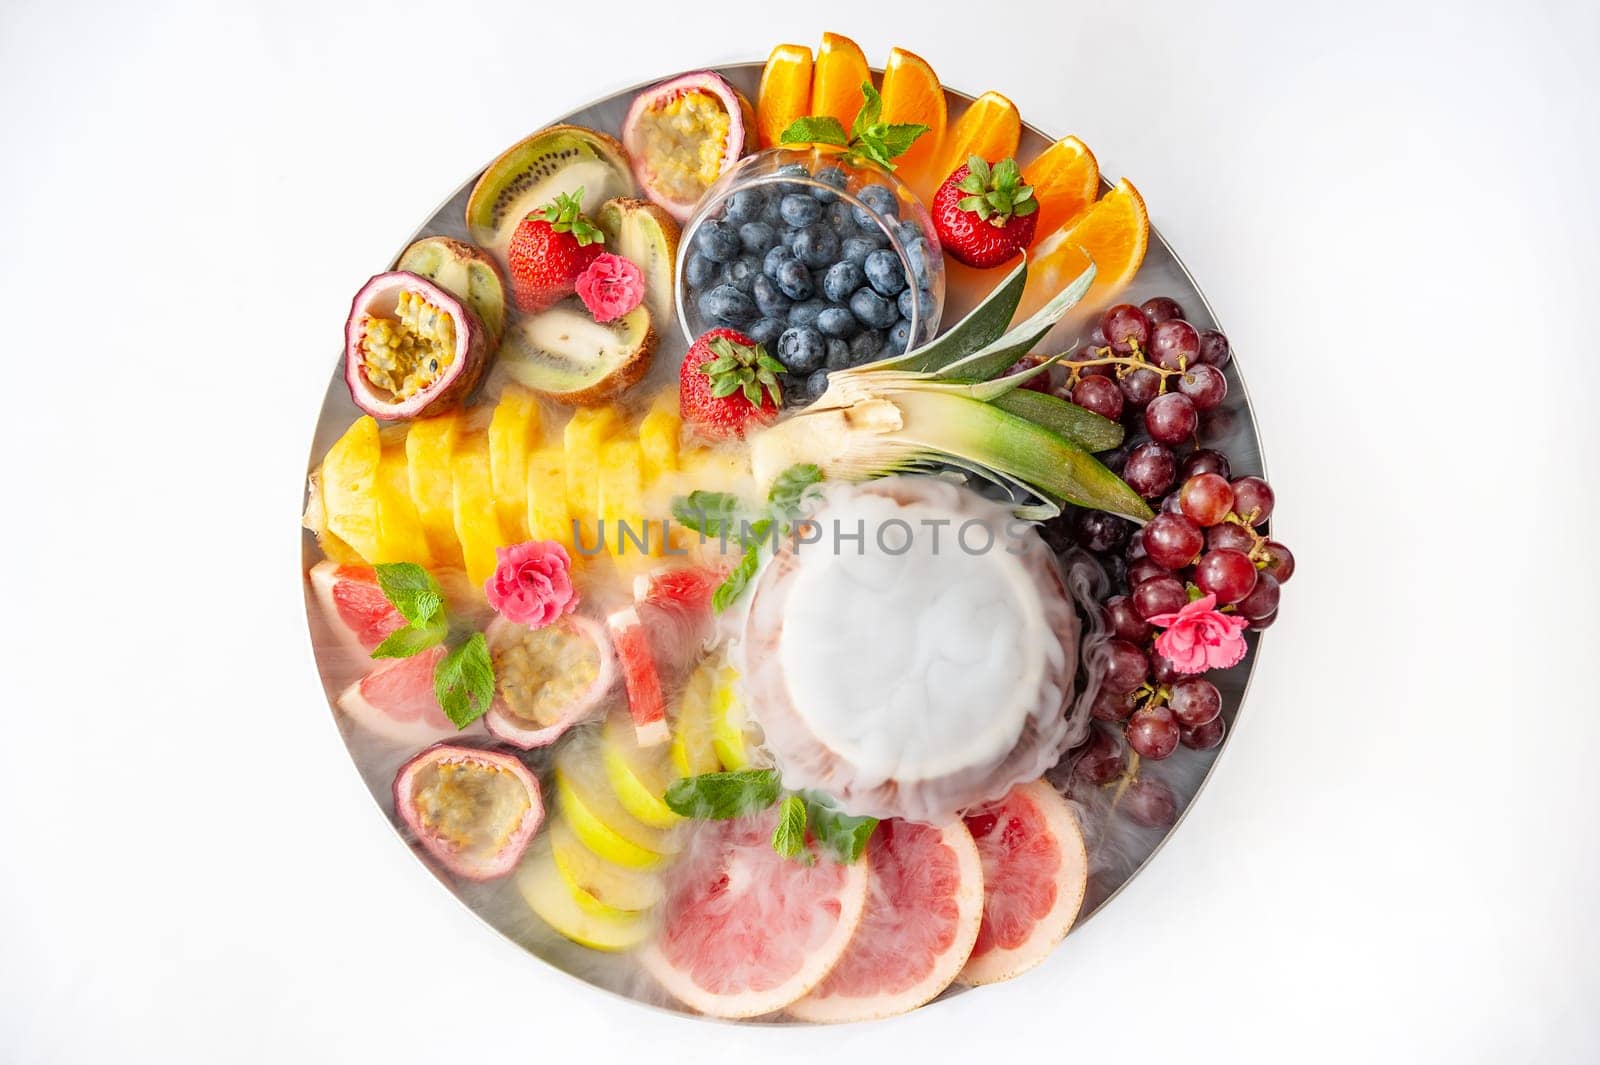 Raw fruits berries assortment platter on the plate, on the white table by bizzyb0y